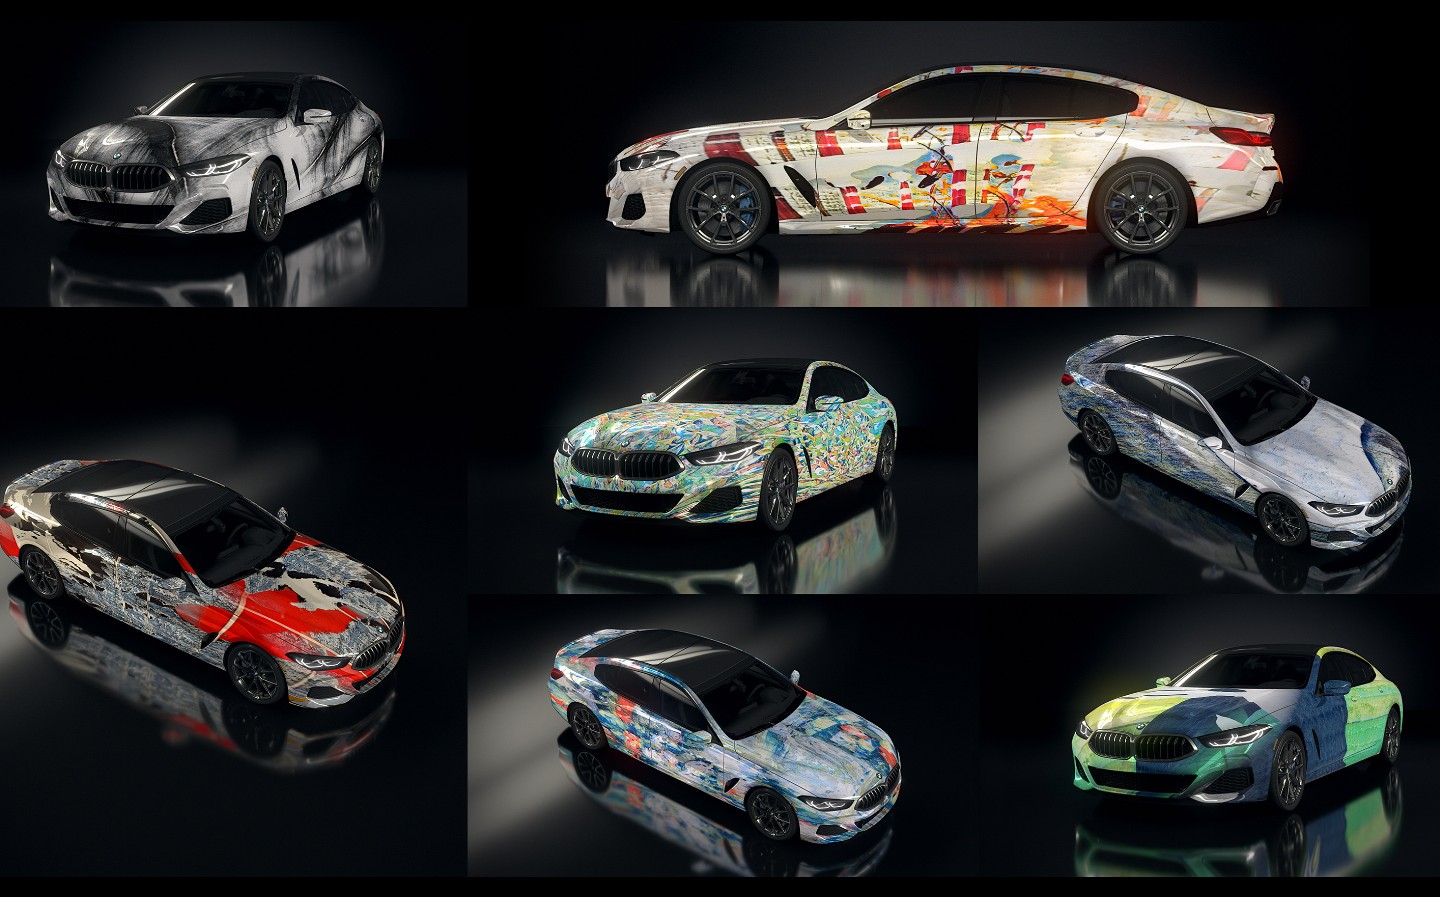 BMW projects AI-generated artwork onto car for ad campaign